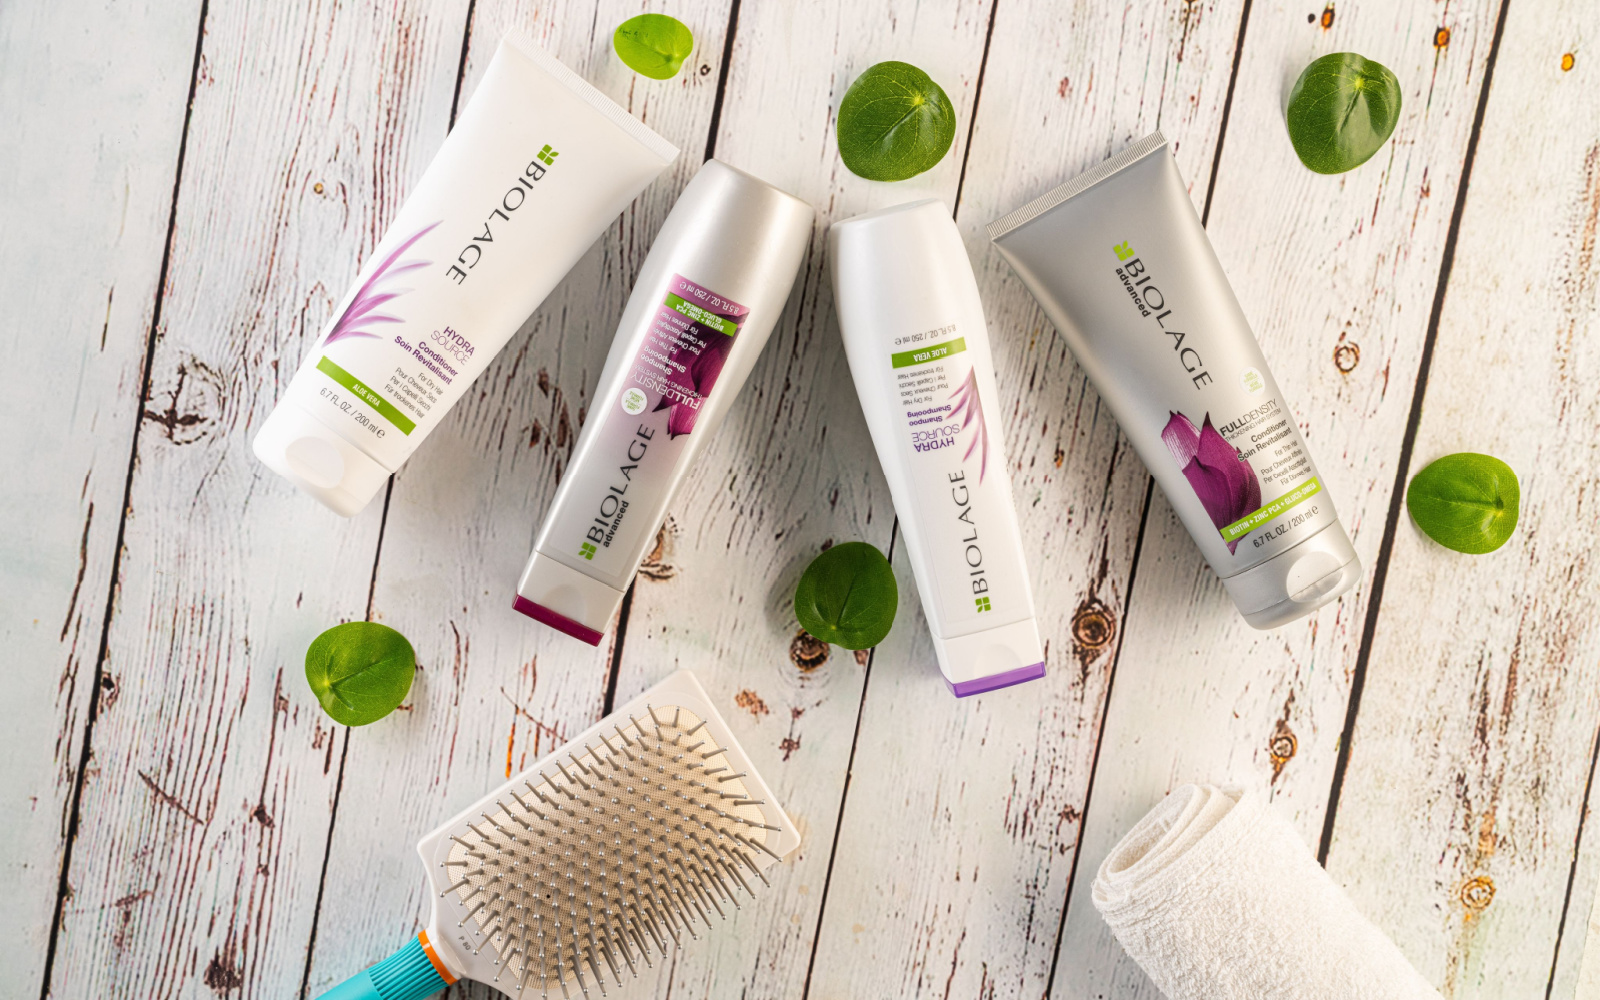 Is Biolage Shampoo Good for Your Hair? | Our . Take